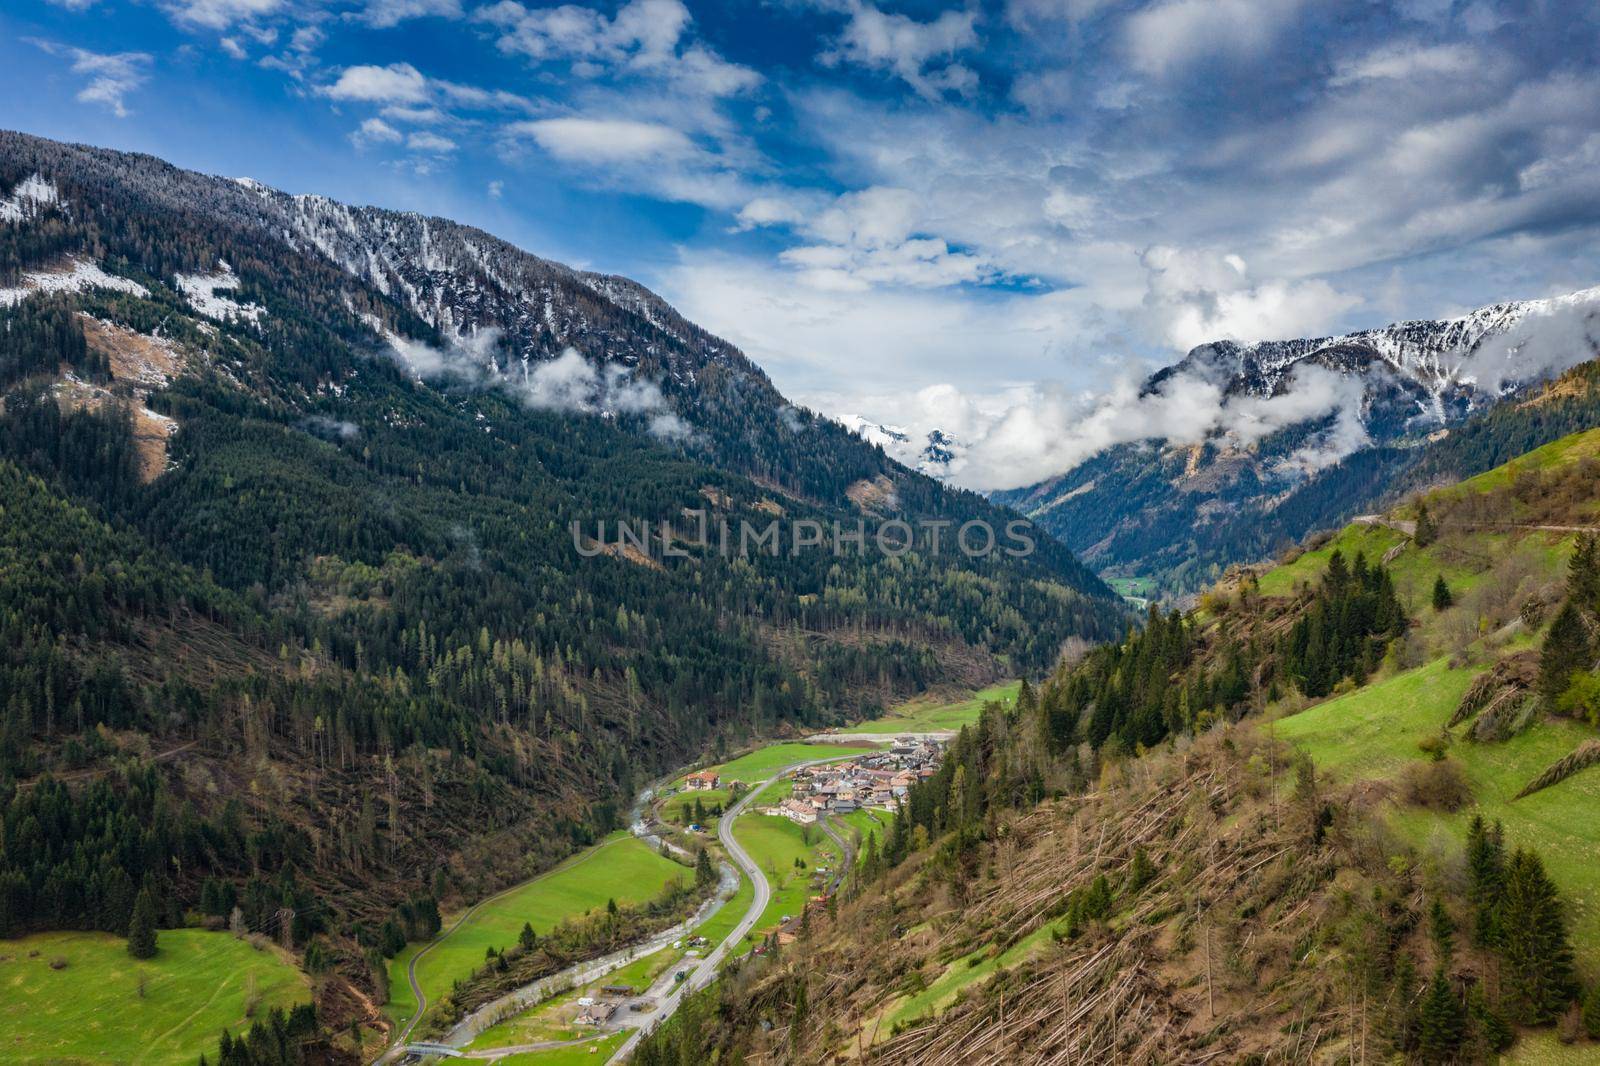 Aerial view of valley with green slopes of the mountains of Italy, Trentino, The trees tumbled down by a wind, huge clouds over a valley, green meadows, Dolomites on background